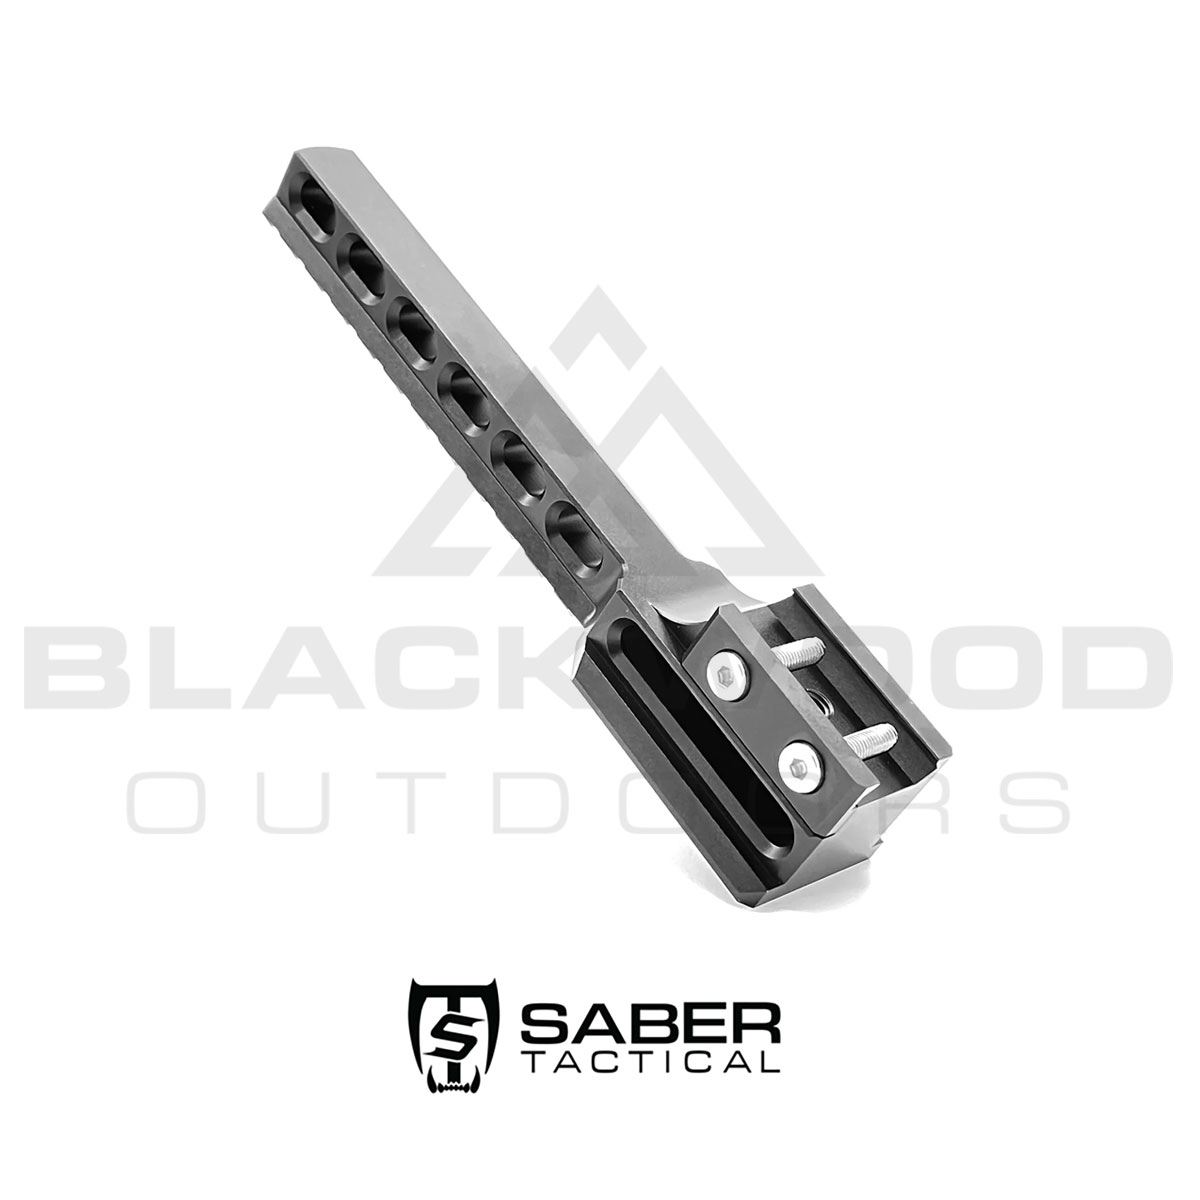 Sabre Tactical universal picatinny to picatinny rail rear side